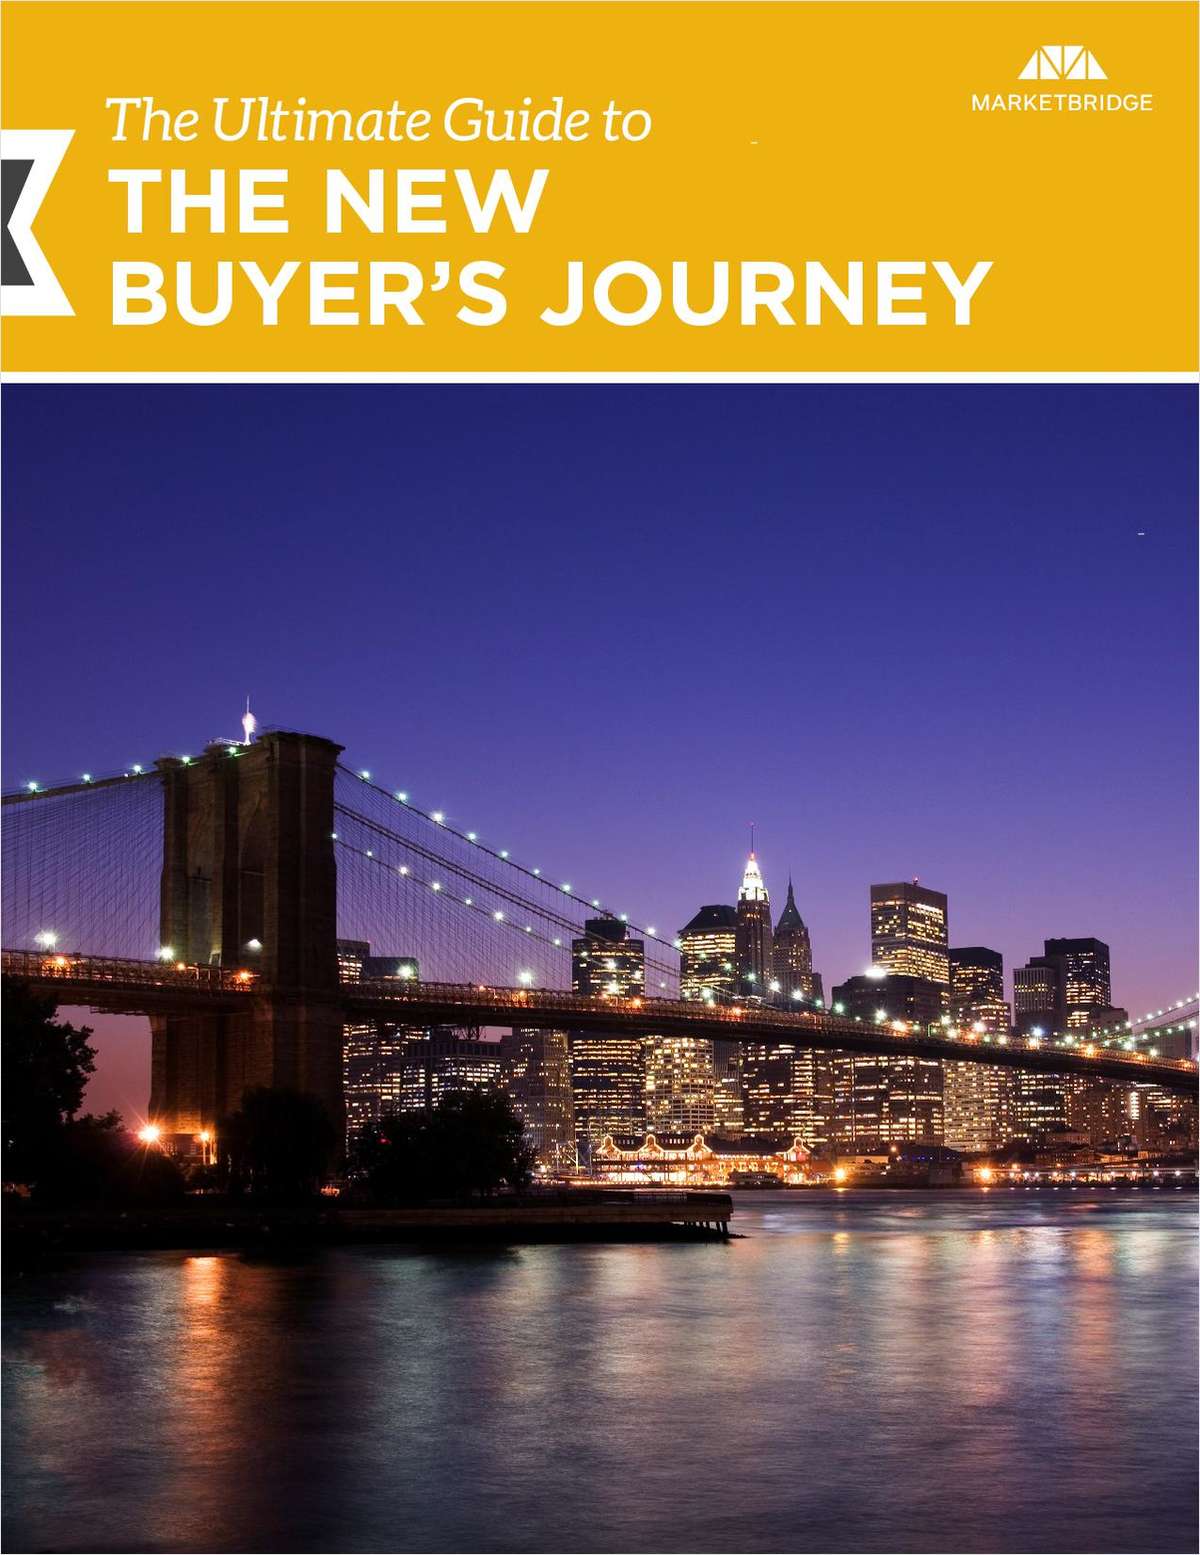 The Ultimate Guide to The New Buyer's Journey